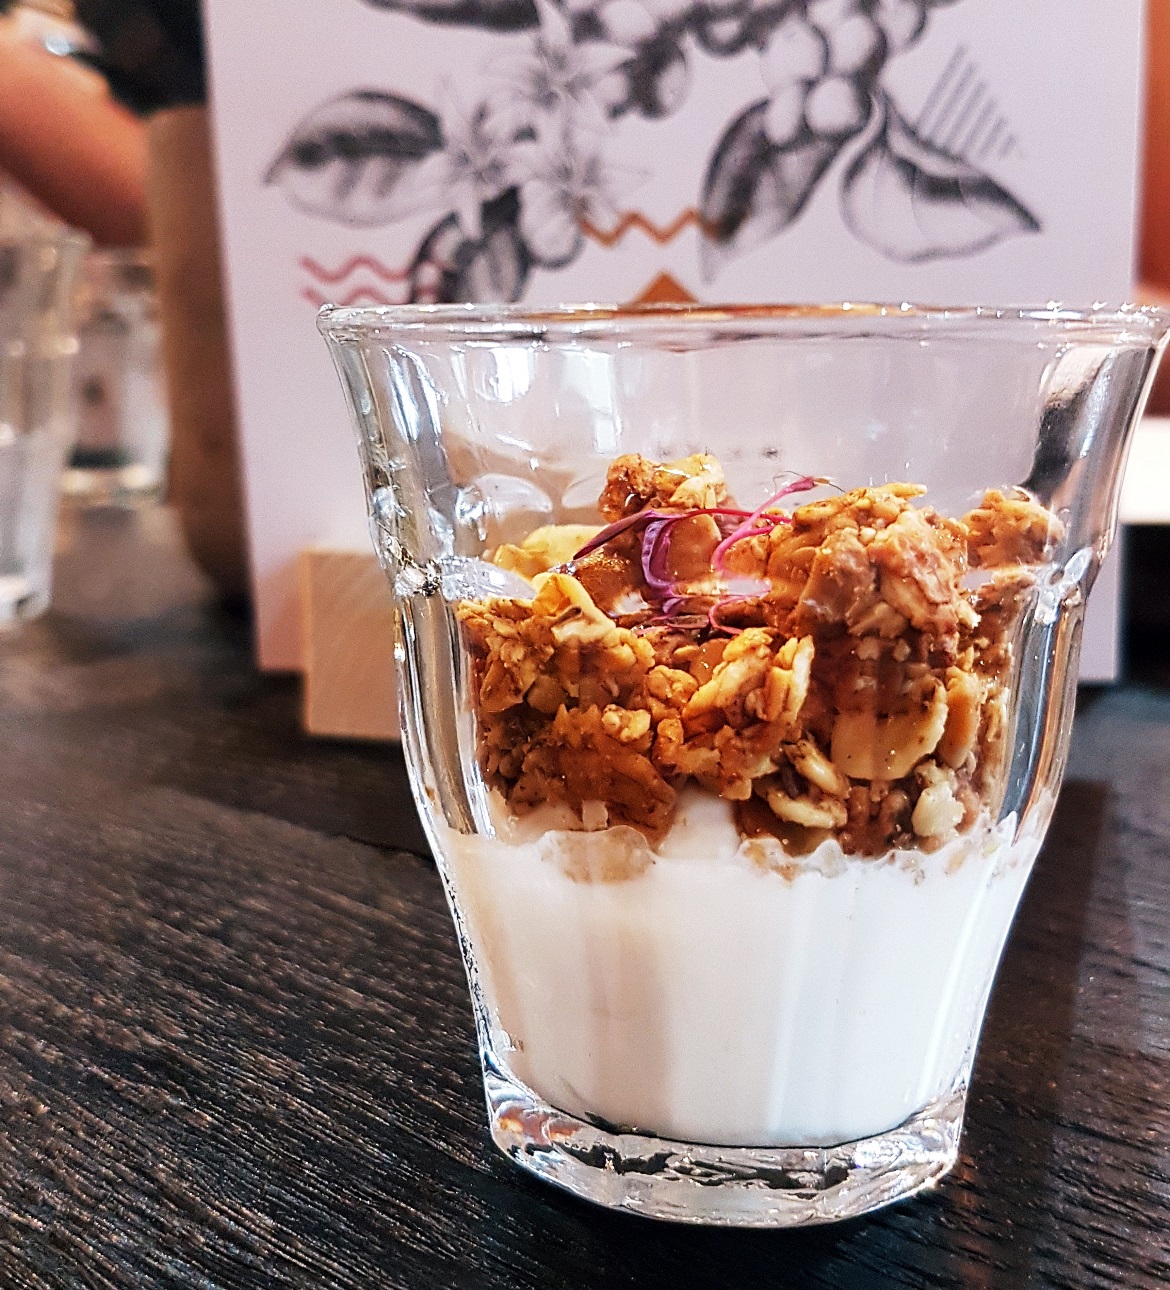 Granola and yoghurt - Review of North Star Coffee Shop by BeckyBecky Blogs